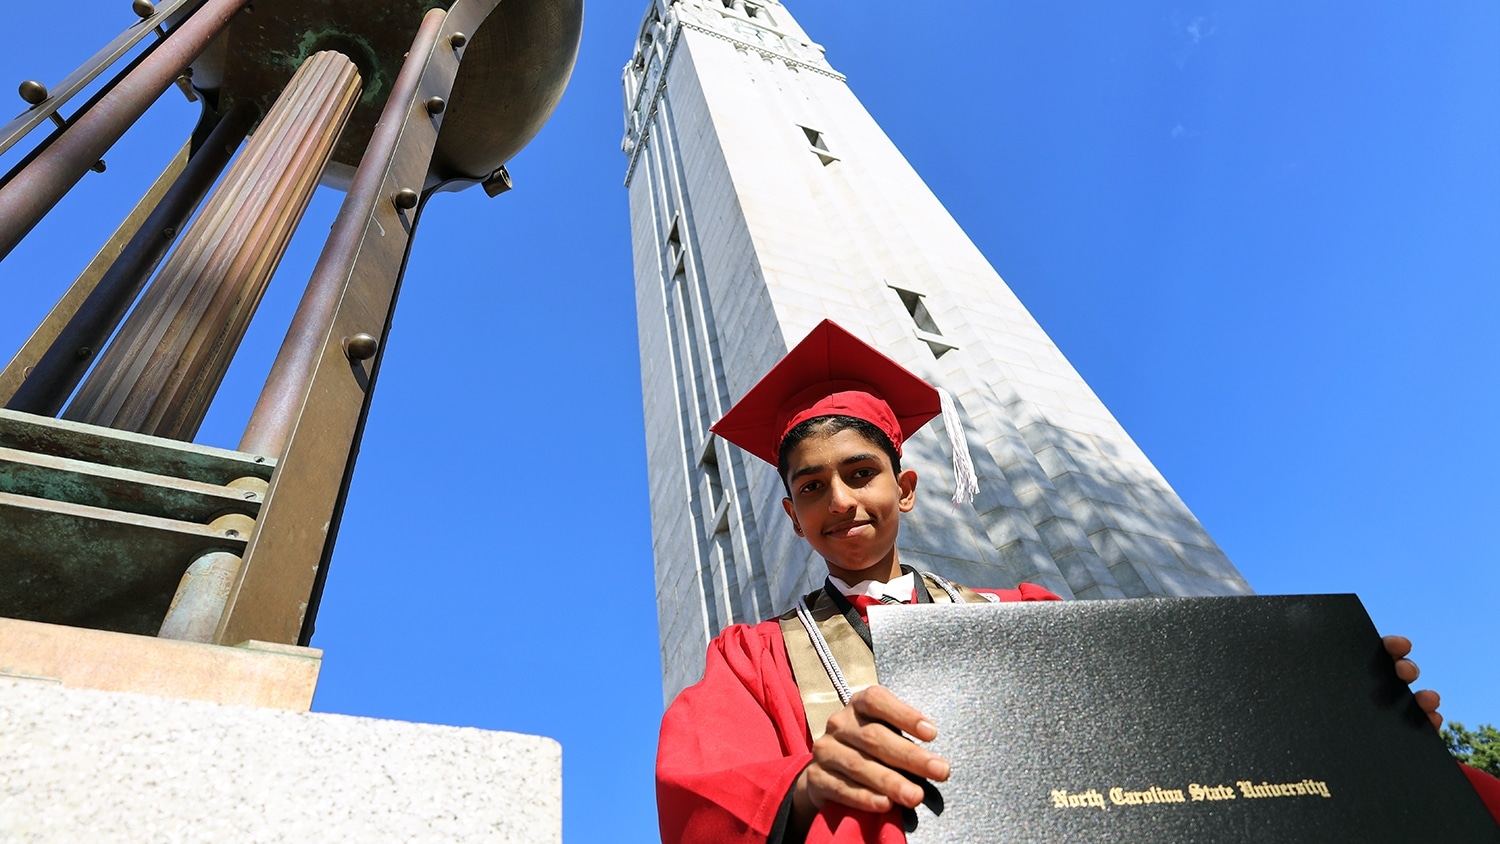 Madhusudan Madhavan in his cap and gown with his diploma at the Belltower